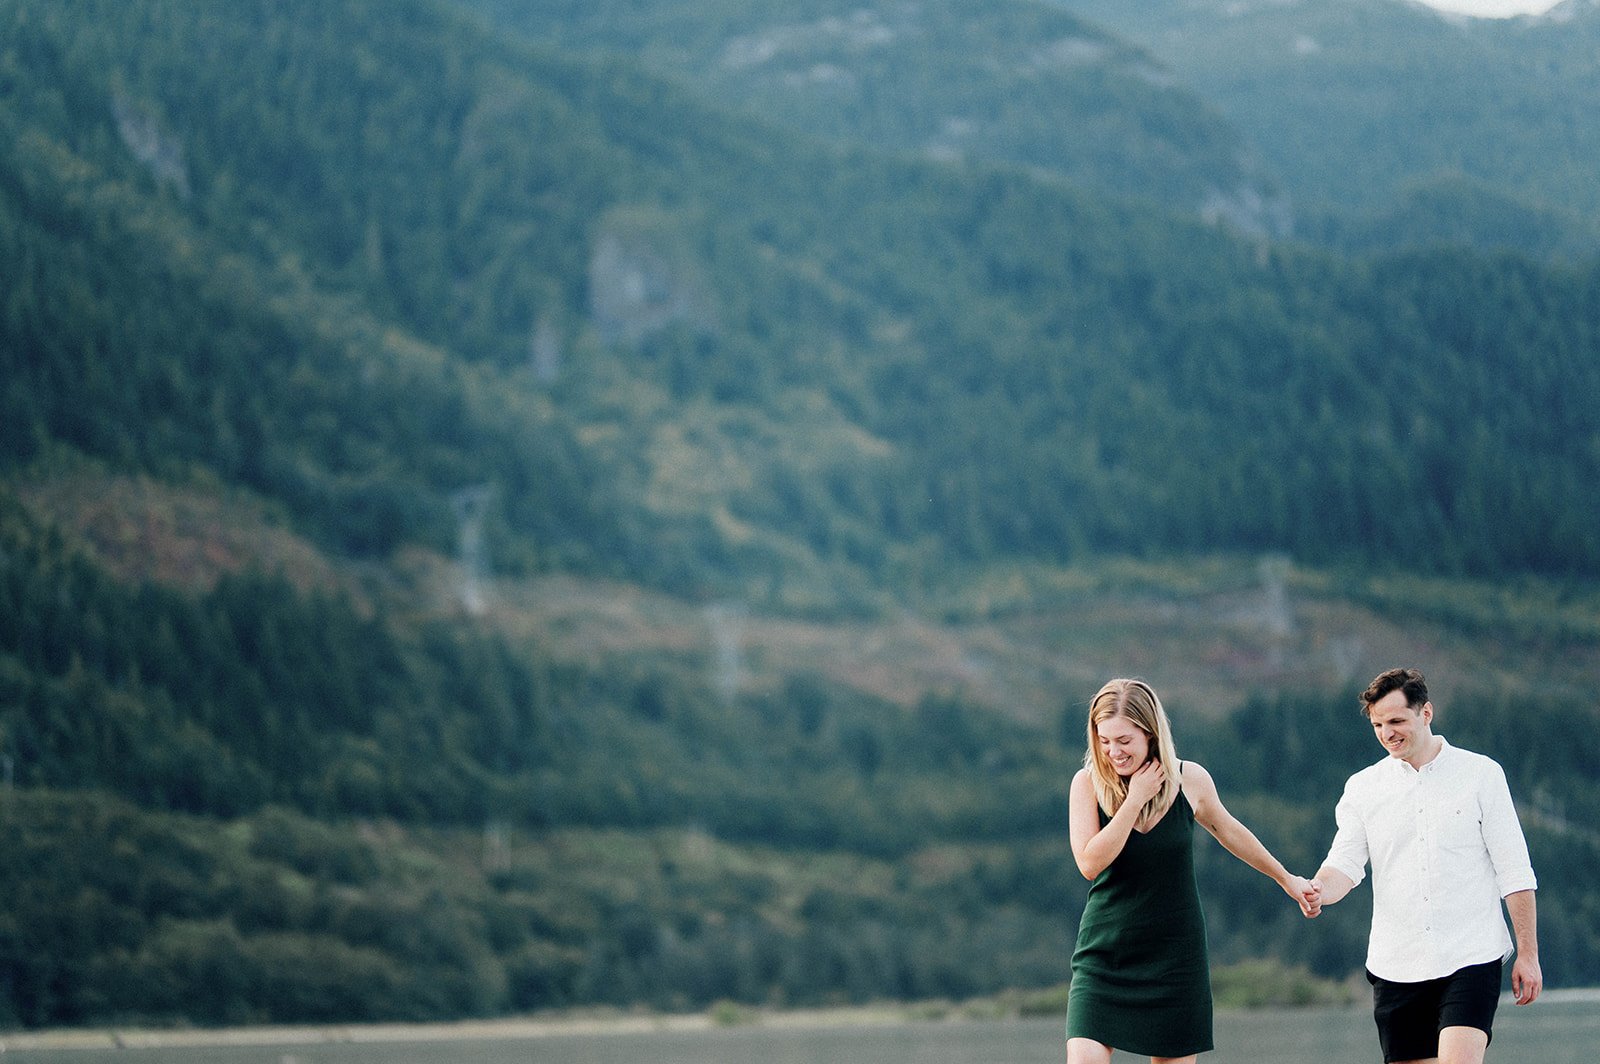 A blonde woman leads a man as they walk through a field in front of the mountains of Squamish, BC.